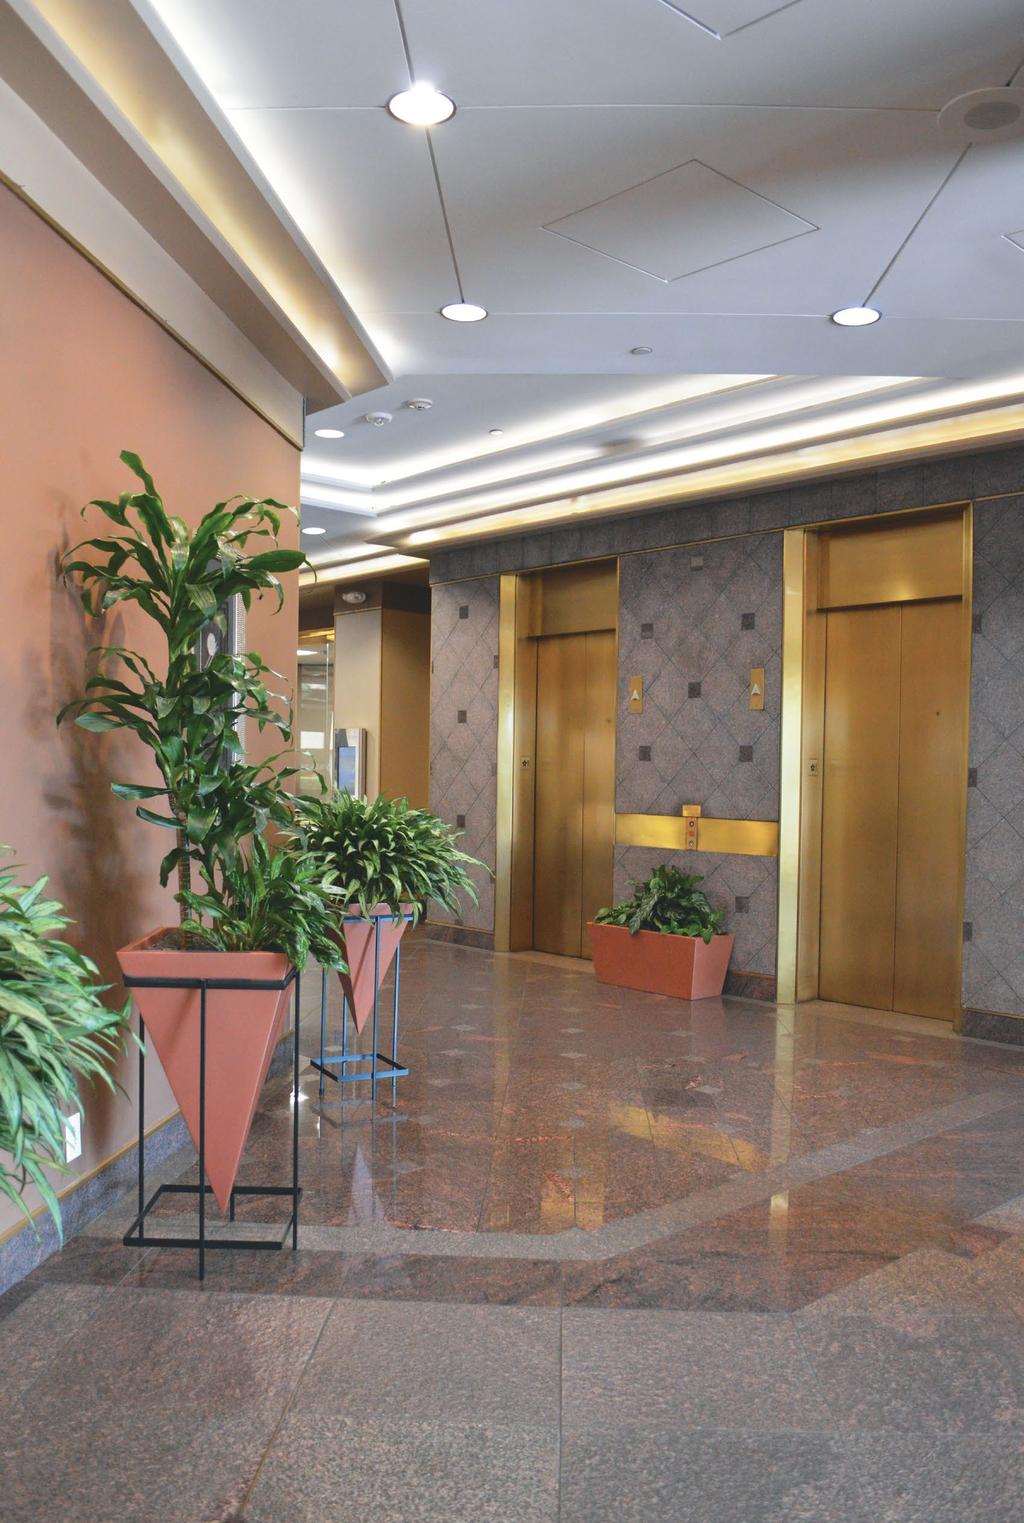 BEAUTIFUL LOBBY ABOUT THE PROPERTY CENTRE PLAZA is an eight (8) story multi-tenant office building conveniently located in North Central San Antonio.